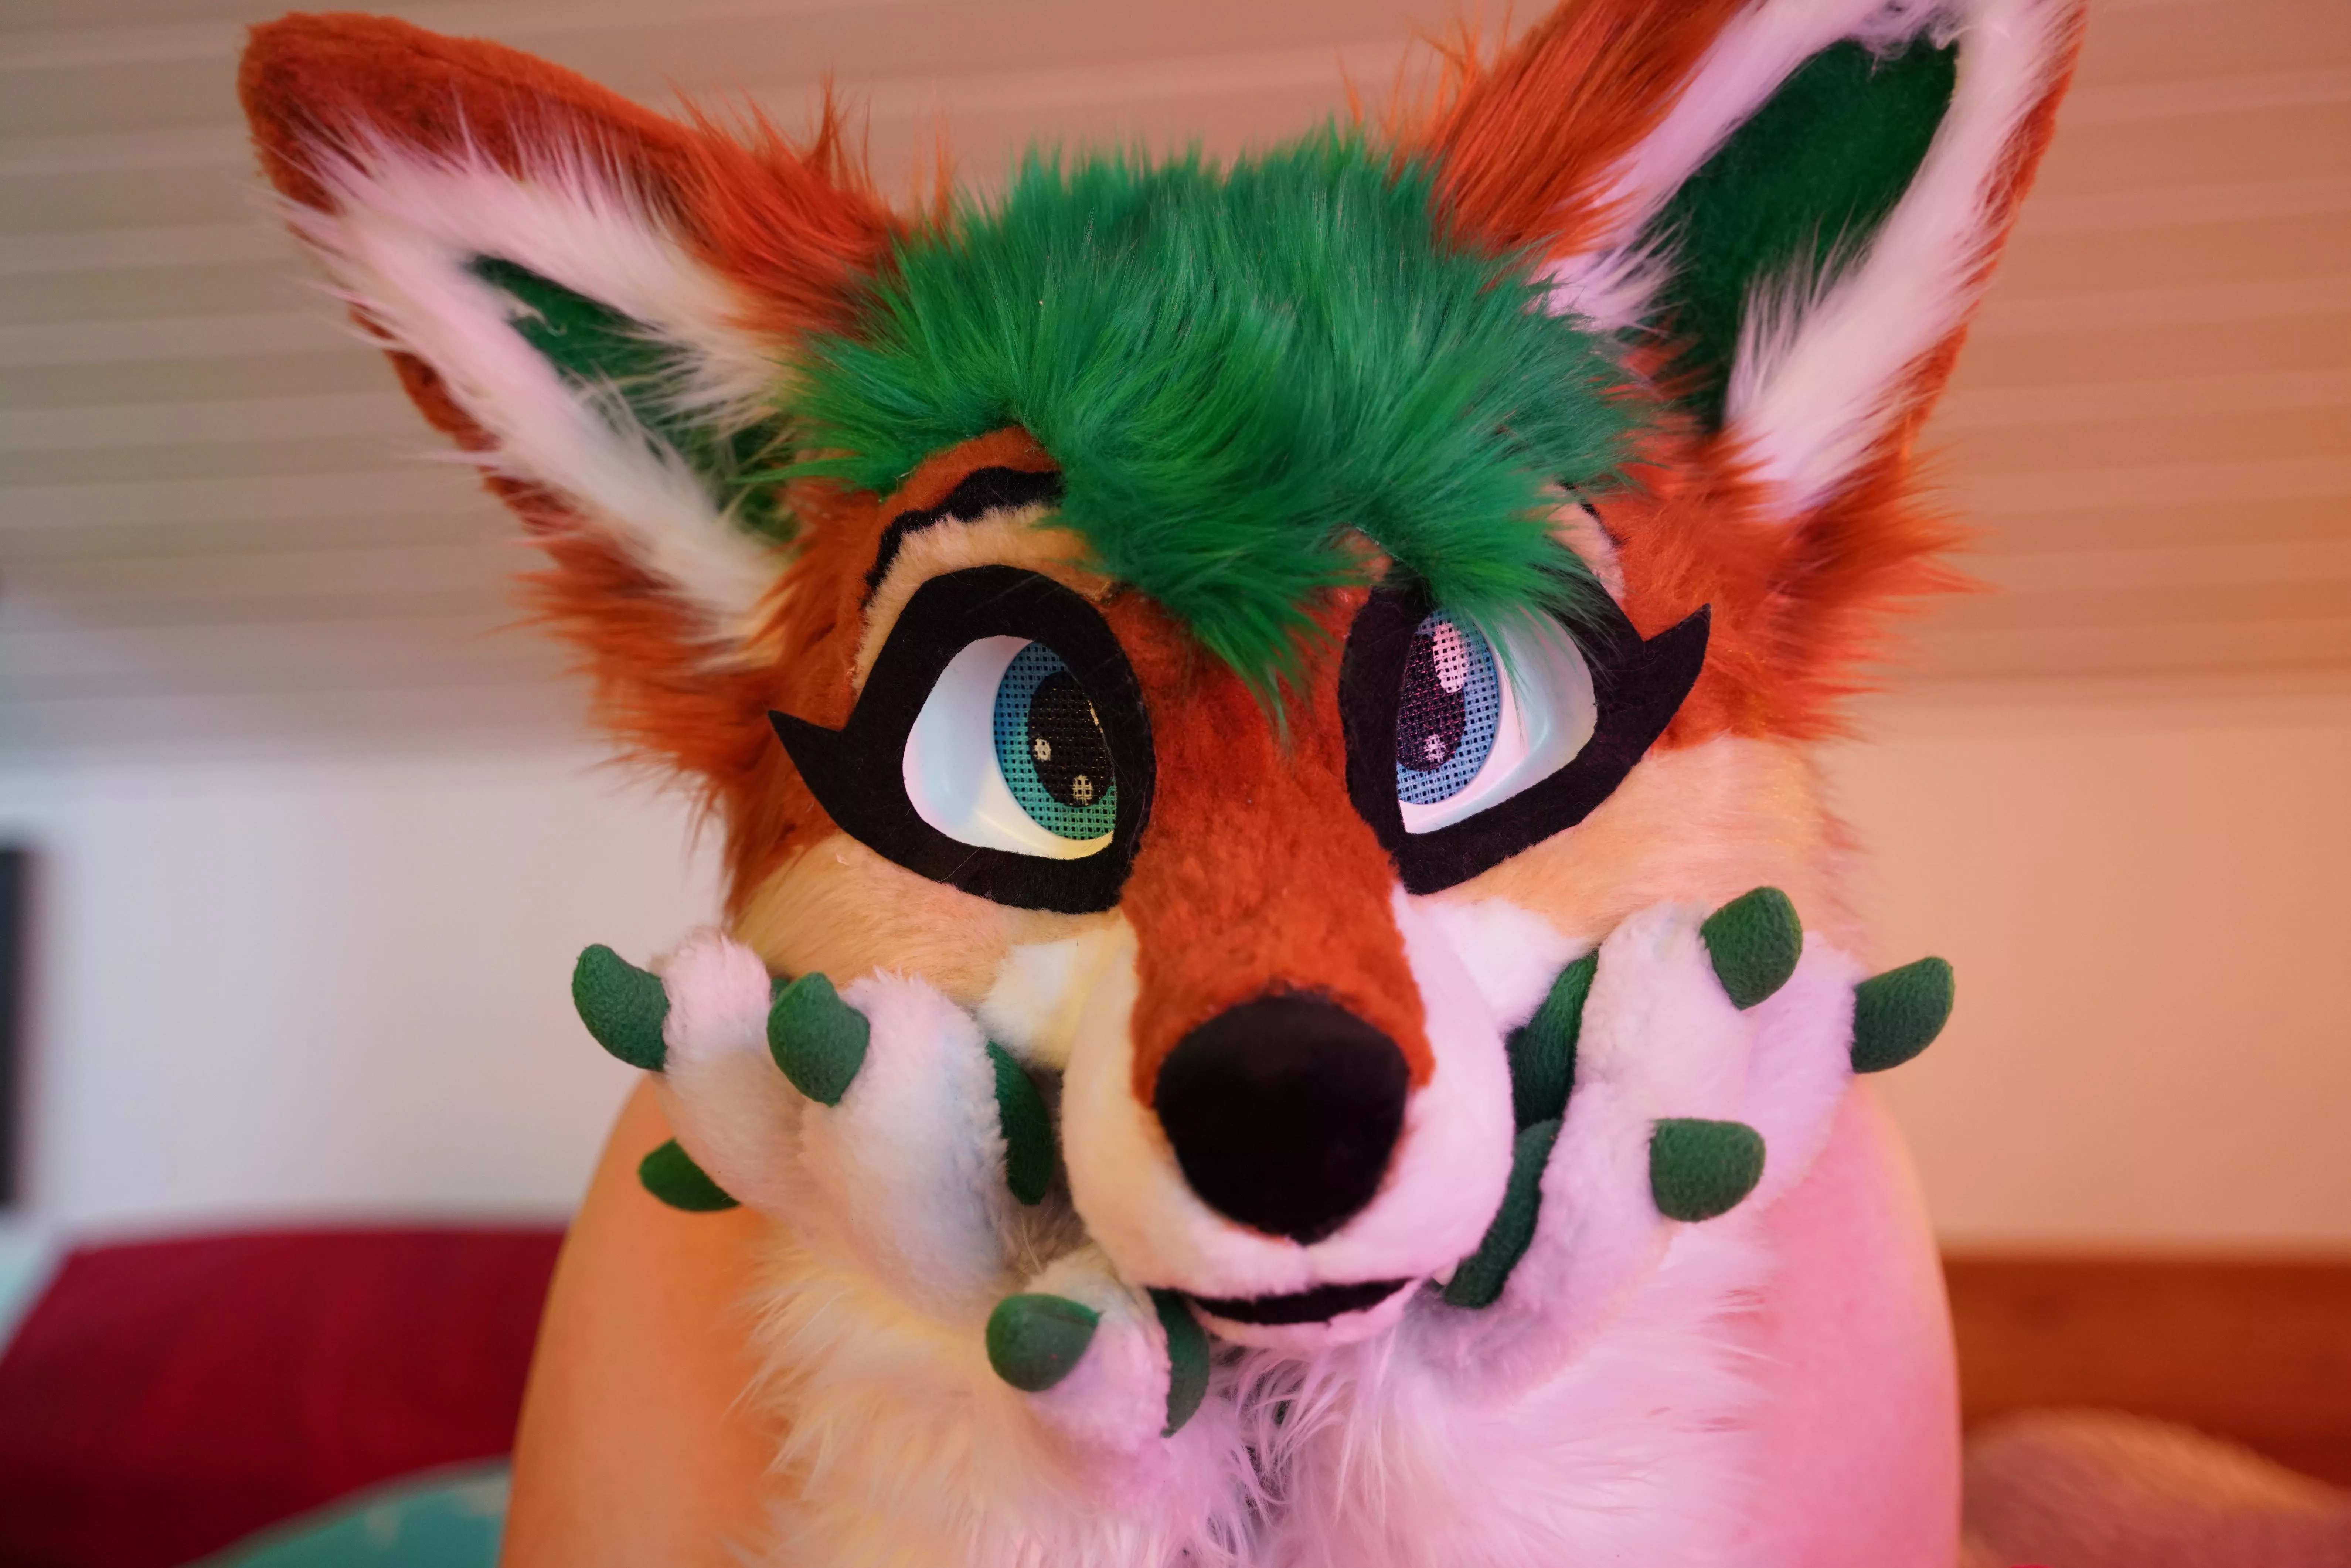 Hi, i'm absolutely new here on reddit and want to make some friends. My name is furry_foxxy and i'm a live streamer